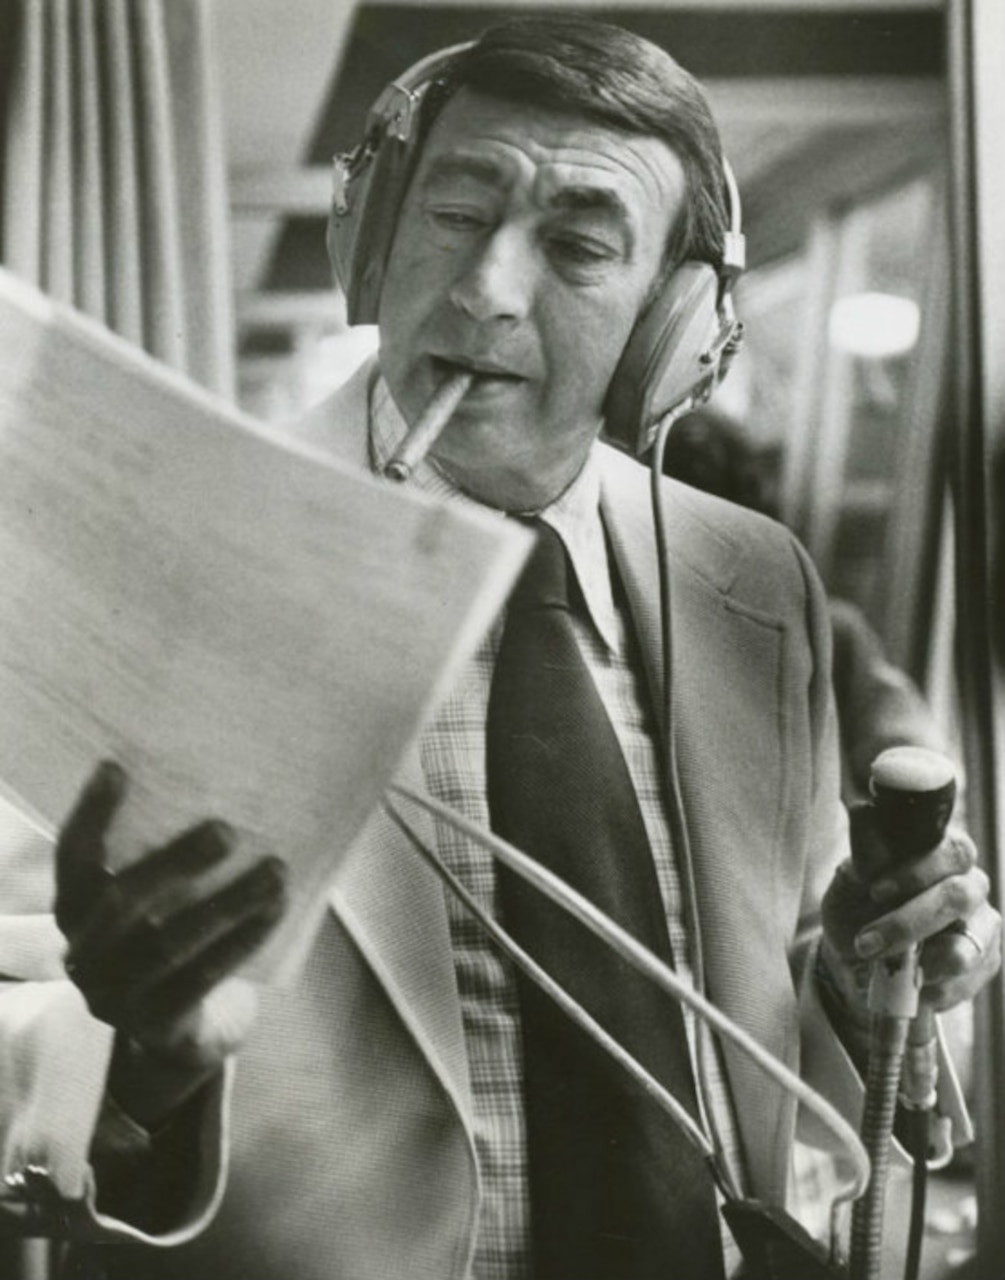 A sportscaster, wearing headphones and with a cigarette in his mouth, reads a script.